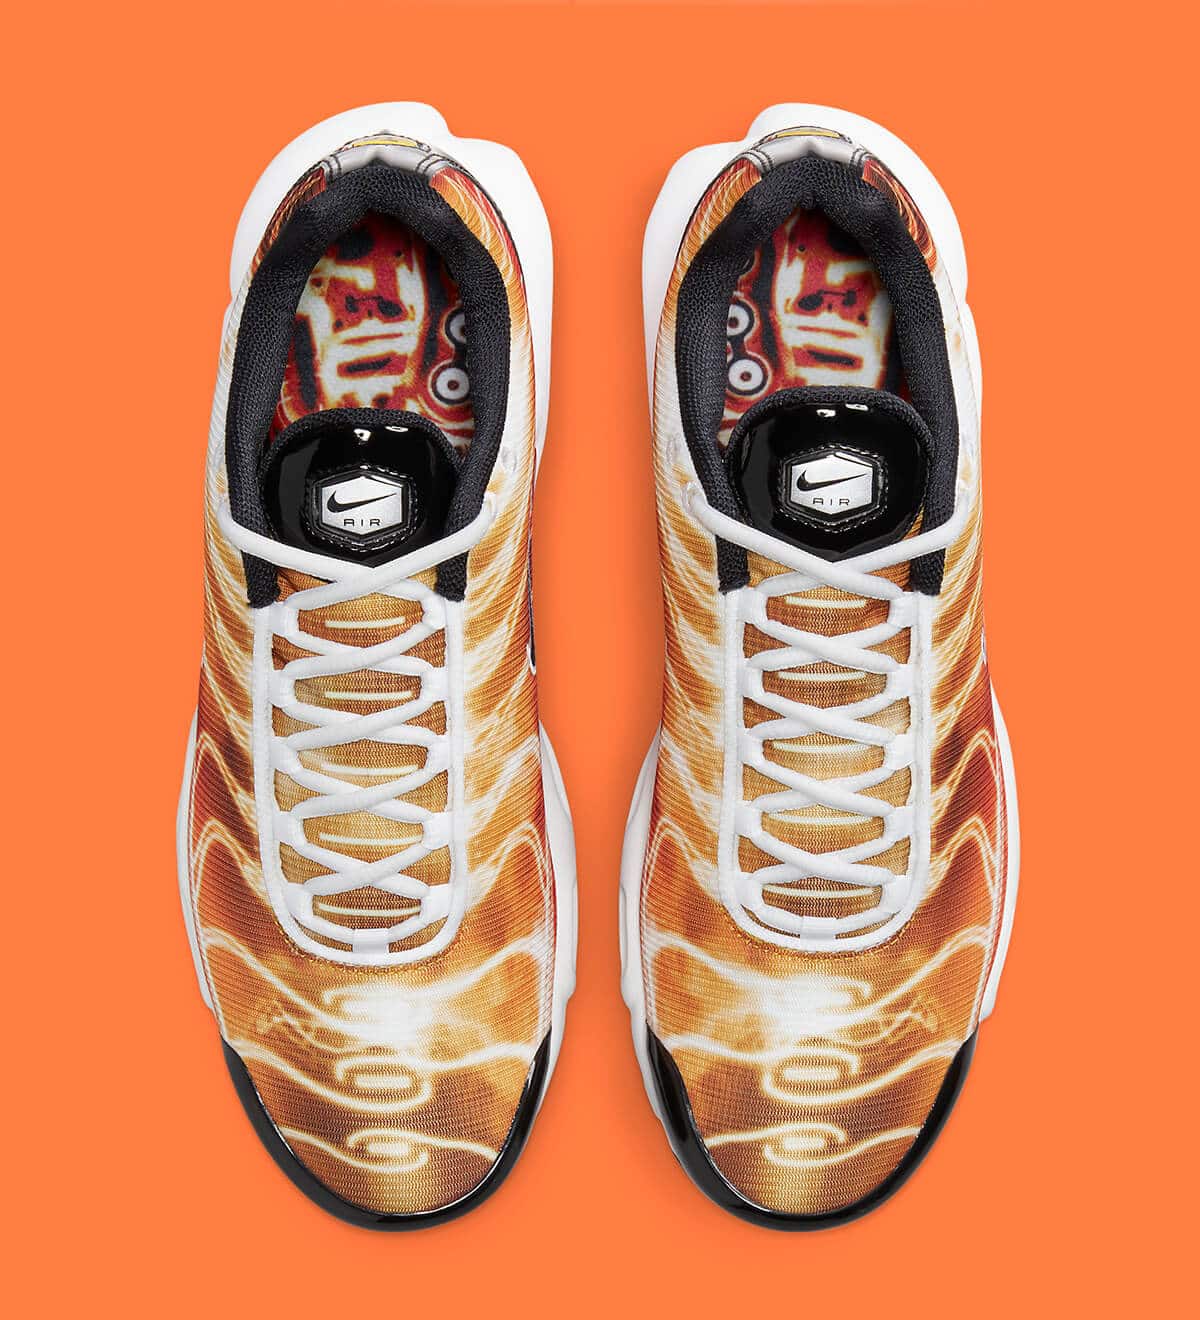 nike air max plus light photography dz3531 600 release date 4